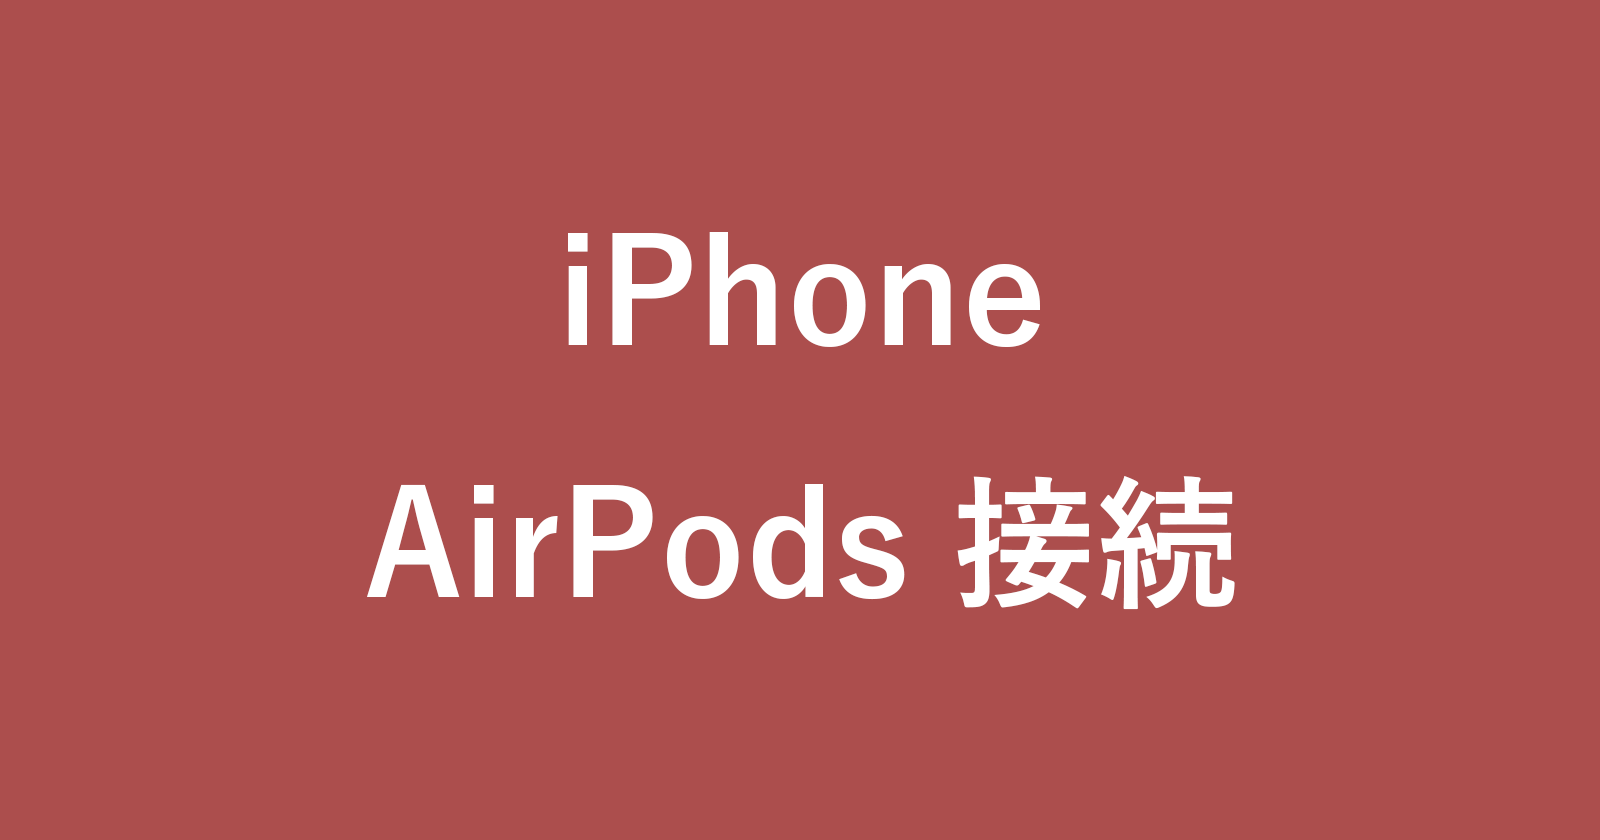 iphone connect airpdods